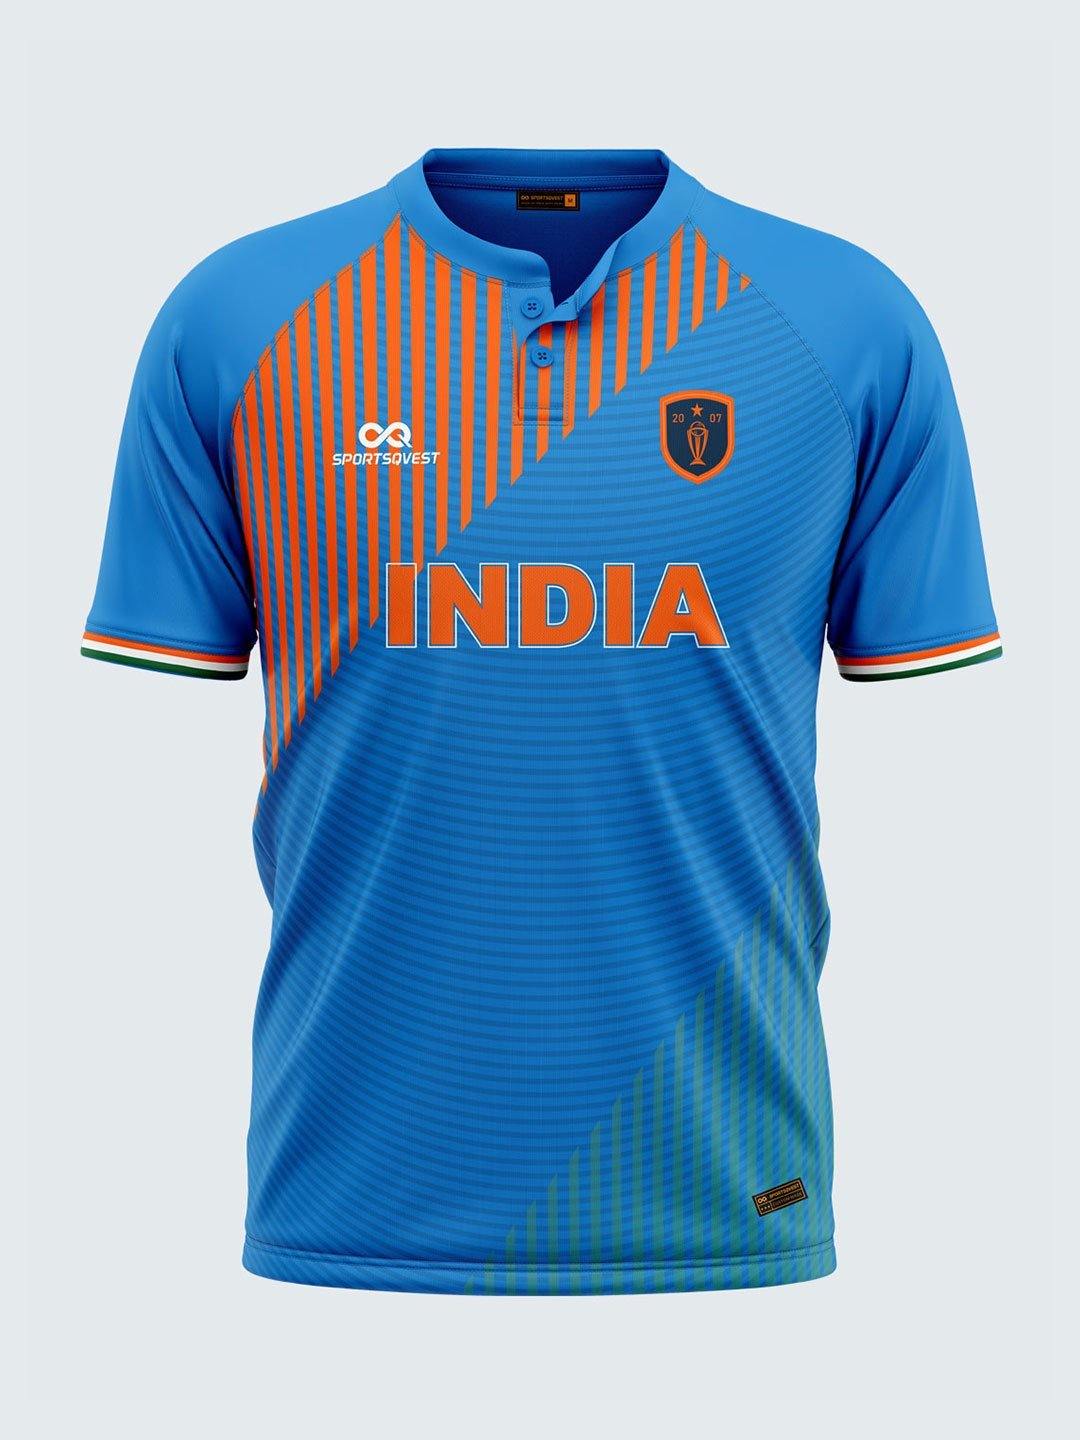 india t20 jersey buy